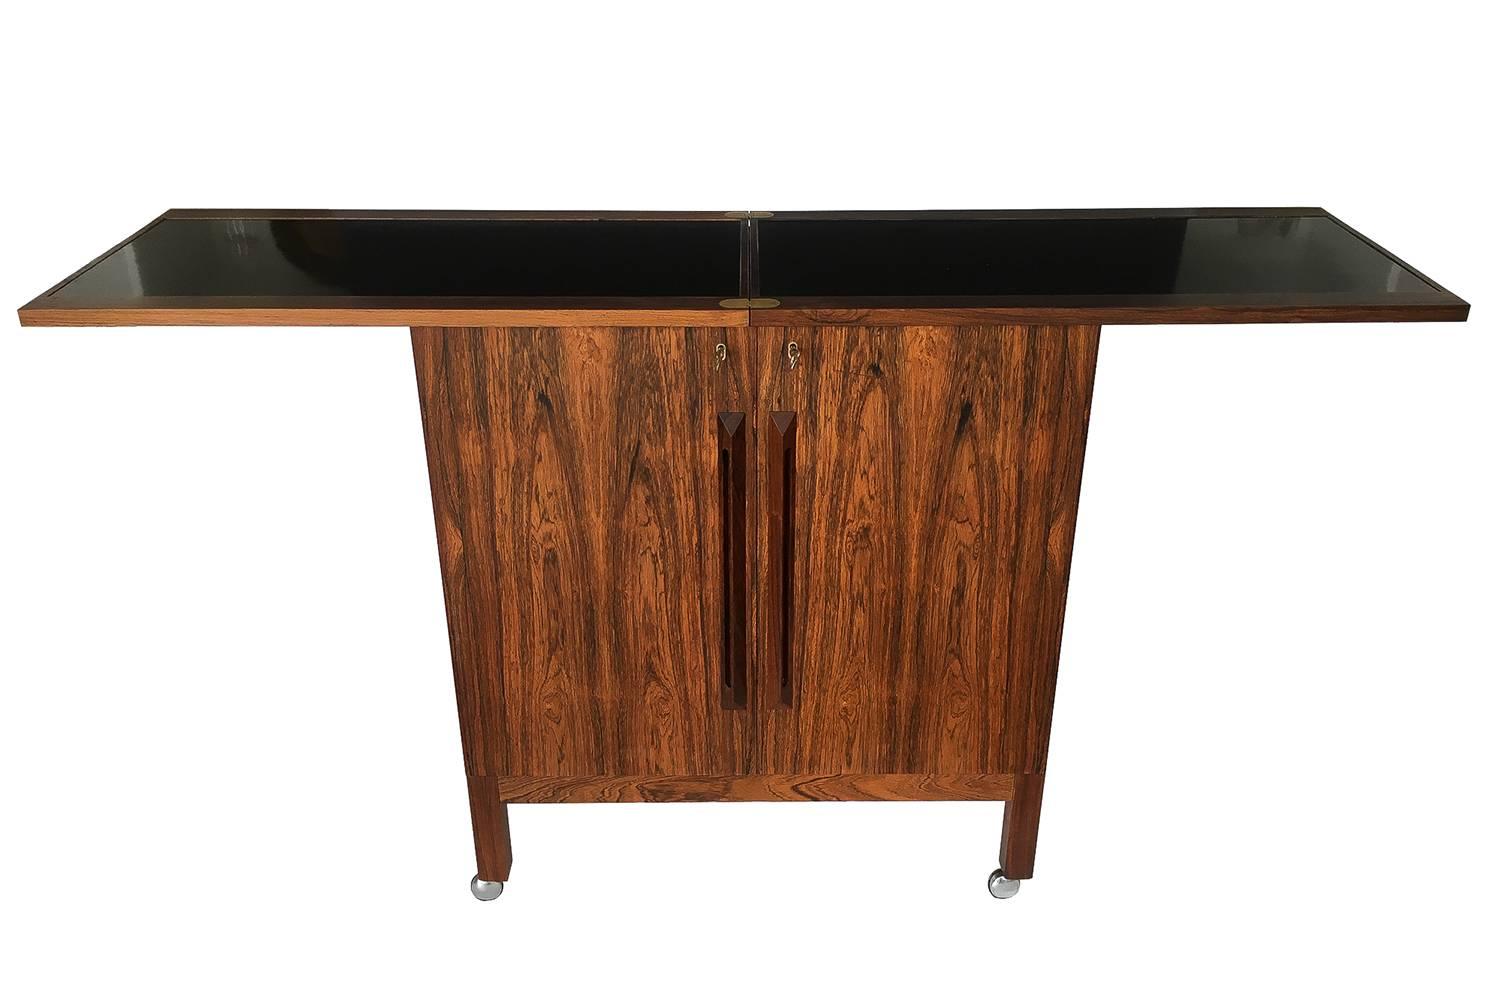 Desirable rosewood bar cabinet designed by Torbjørn Afdal for Bruksbo of Norway. Locking cabinet opens to reveal storage for all necessary bar accoutrements. Black laminate flip-top doubles in size for additional working space. Bar is complete with